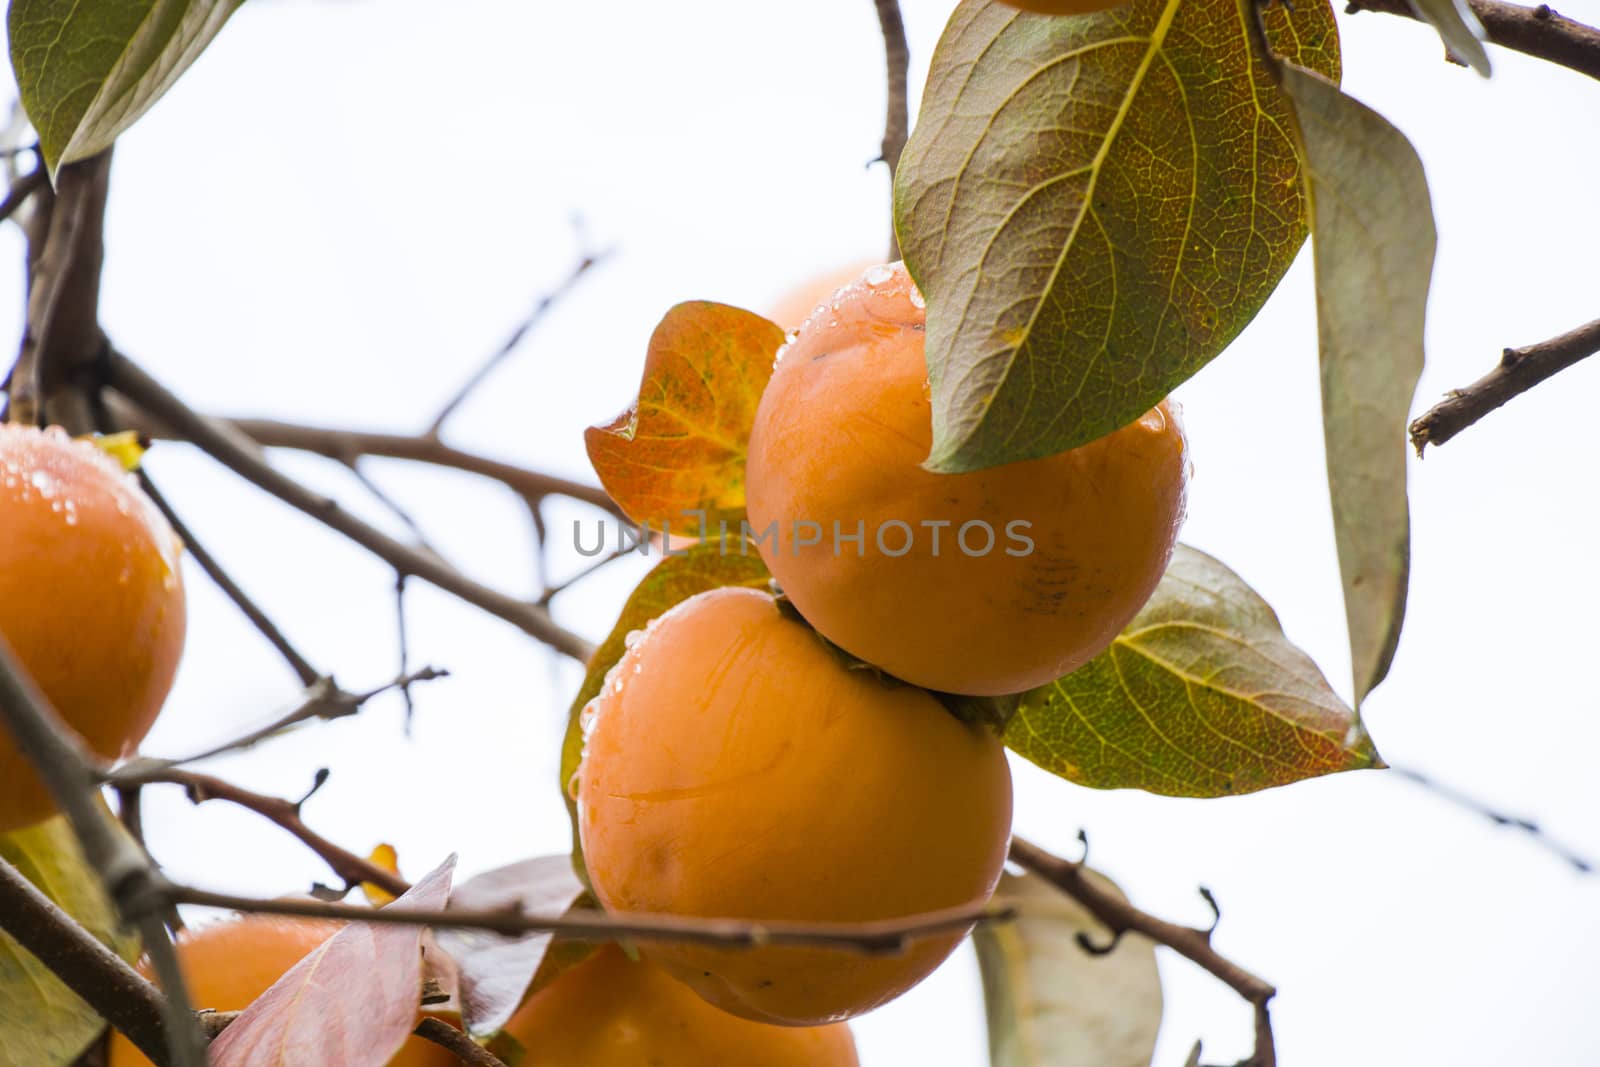 Persimmons on the tree, branch and leaves, autumn fruit close-up by Taidundua